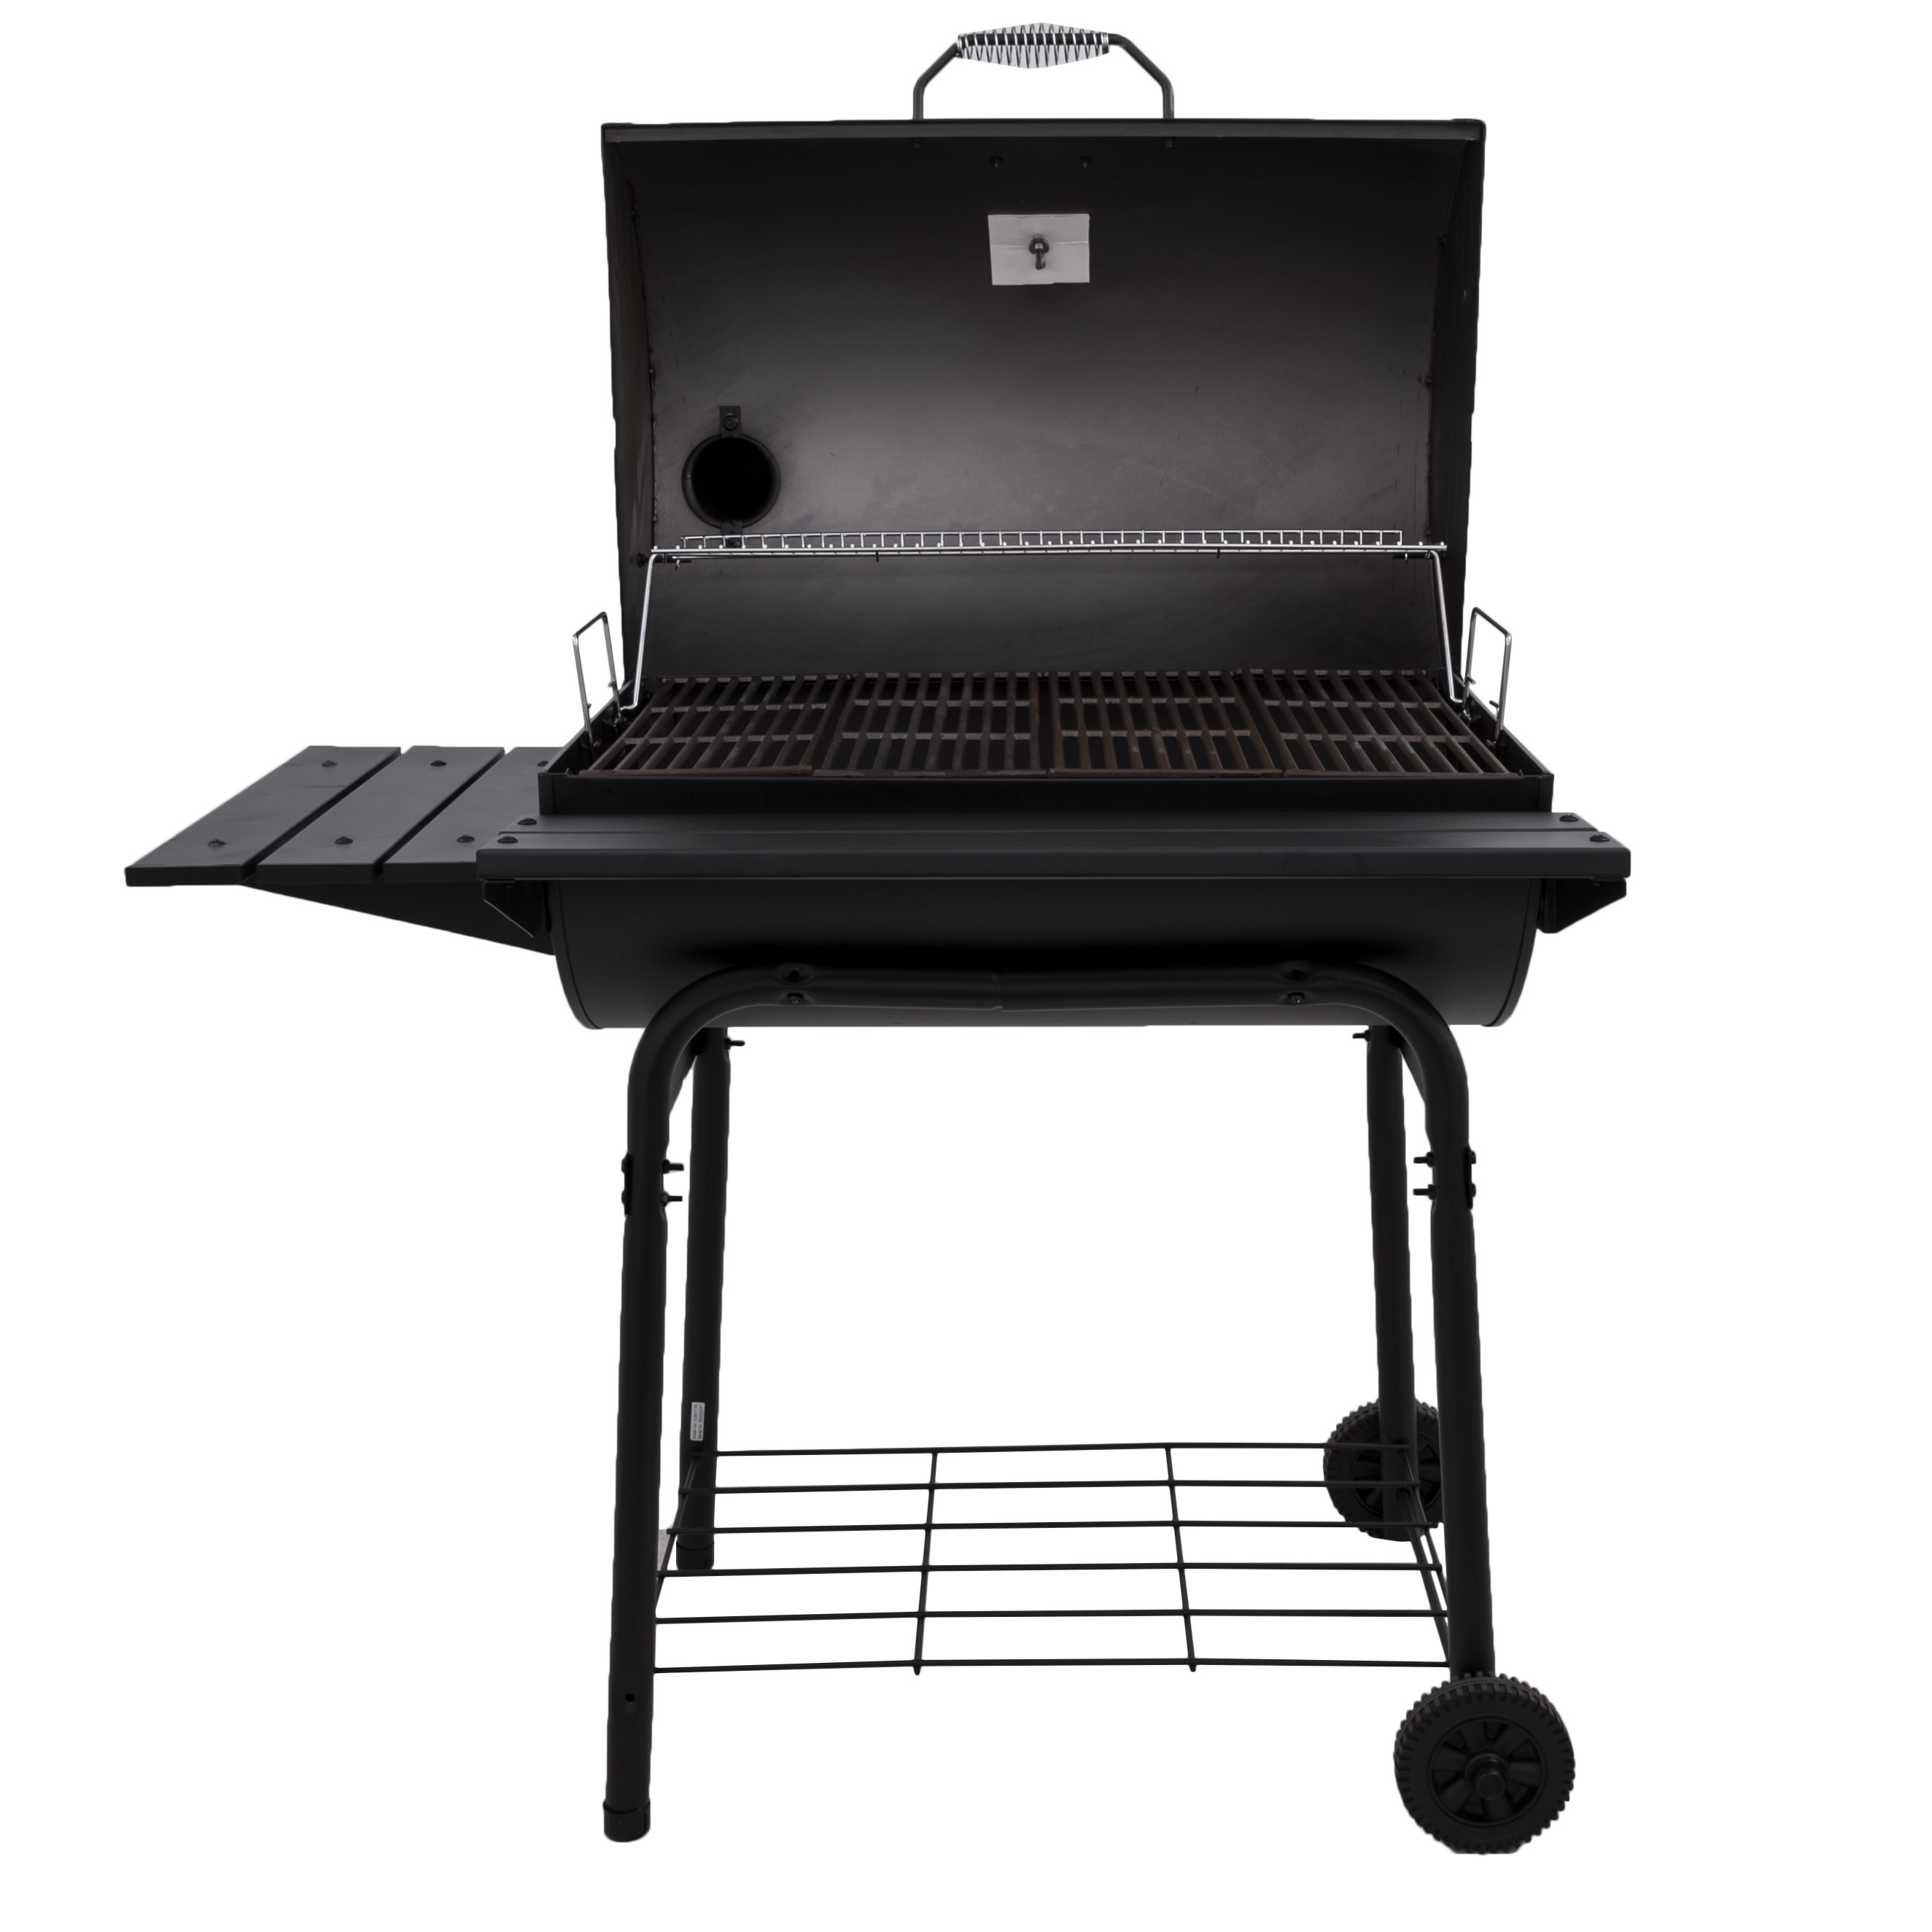 American Gourmet by Char-Broil 840 sq in Charcoal Barrel Outdoor Grill - image 4 of 9